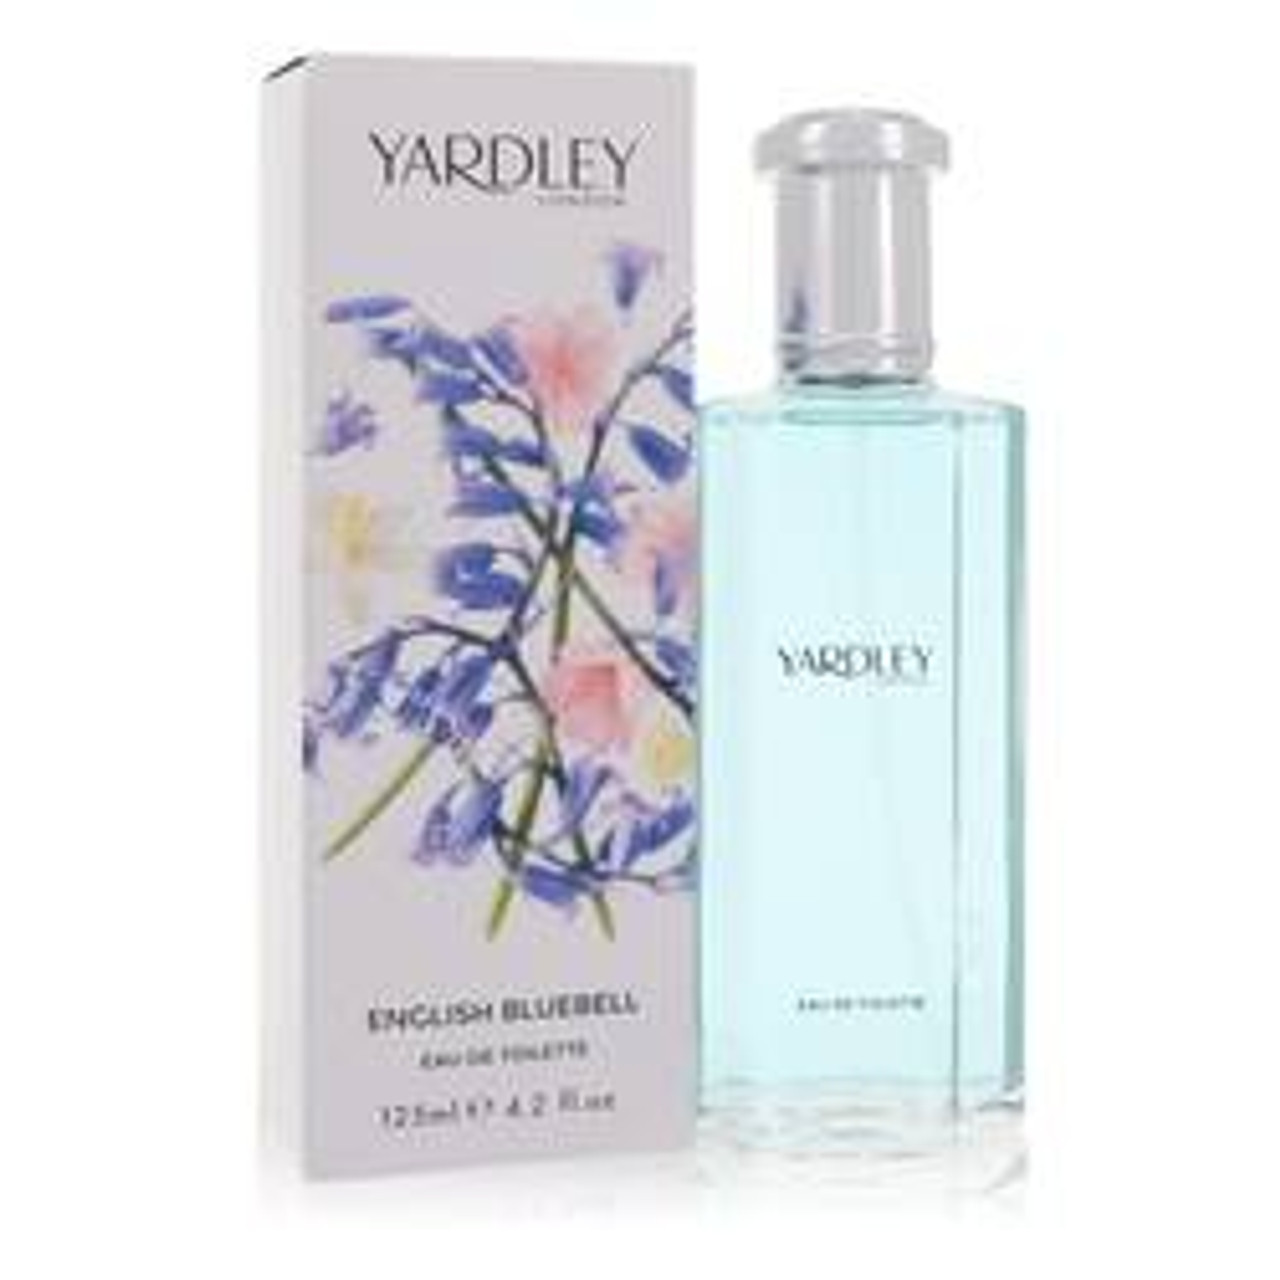 English Bluebell Perfume By Yardley London Eau De Toilette Spray 4.2 oz for Women - [From 59.00 - Choose pk Qty ] - *Ships from Miami